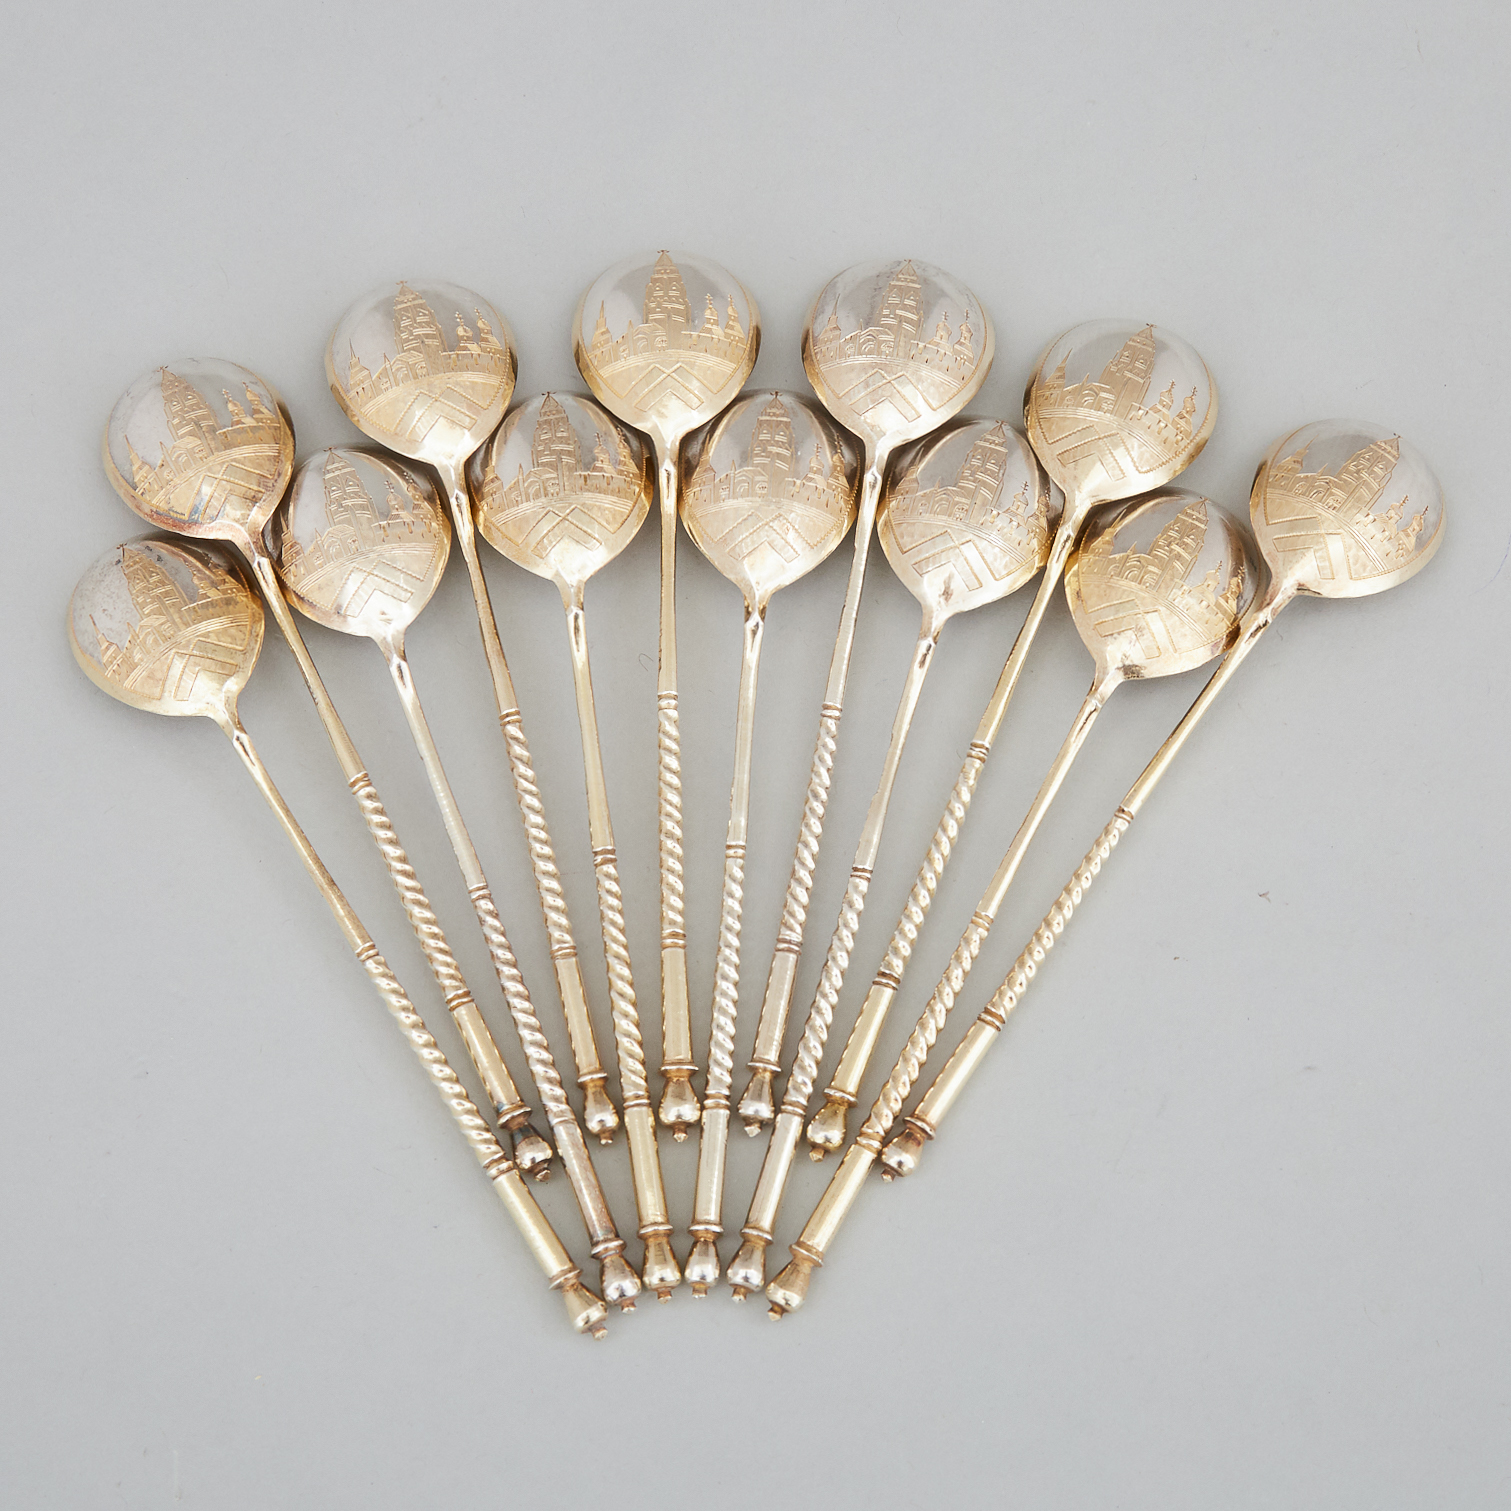 Set of Twelve Russian Engraved Silver-Gilt Tea Spoons, Moscow, 1883